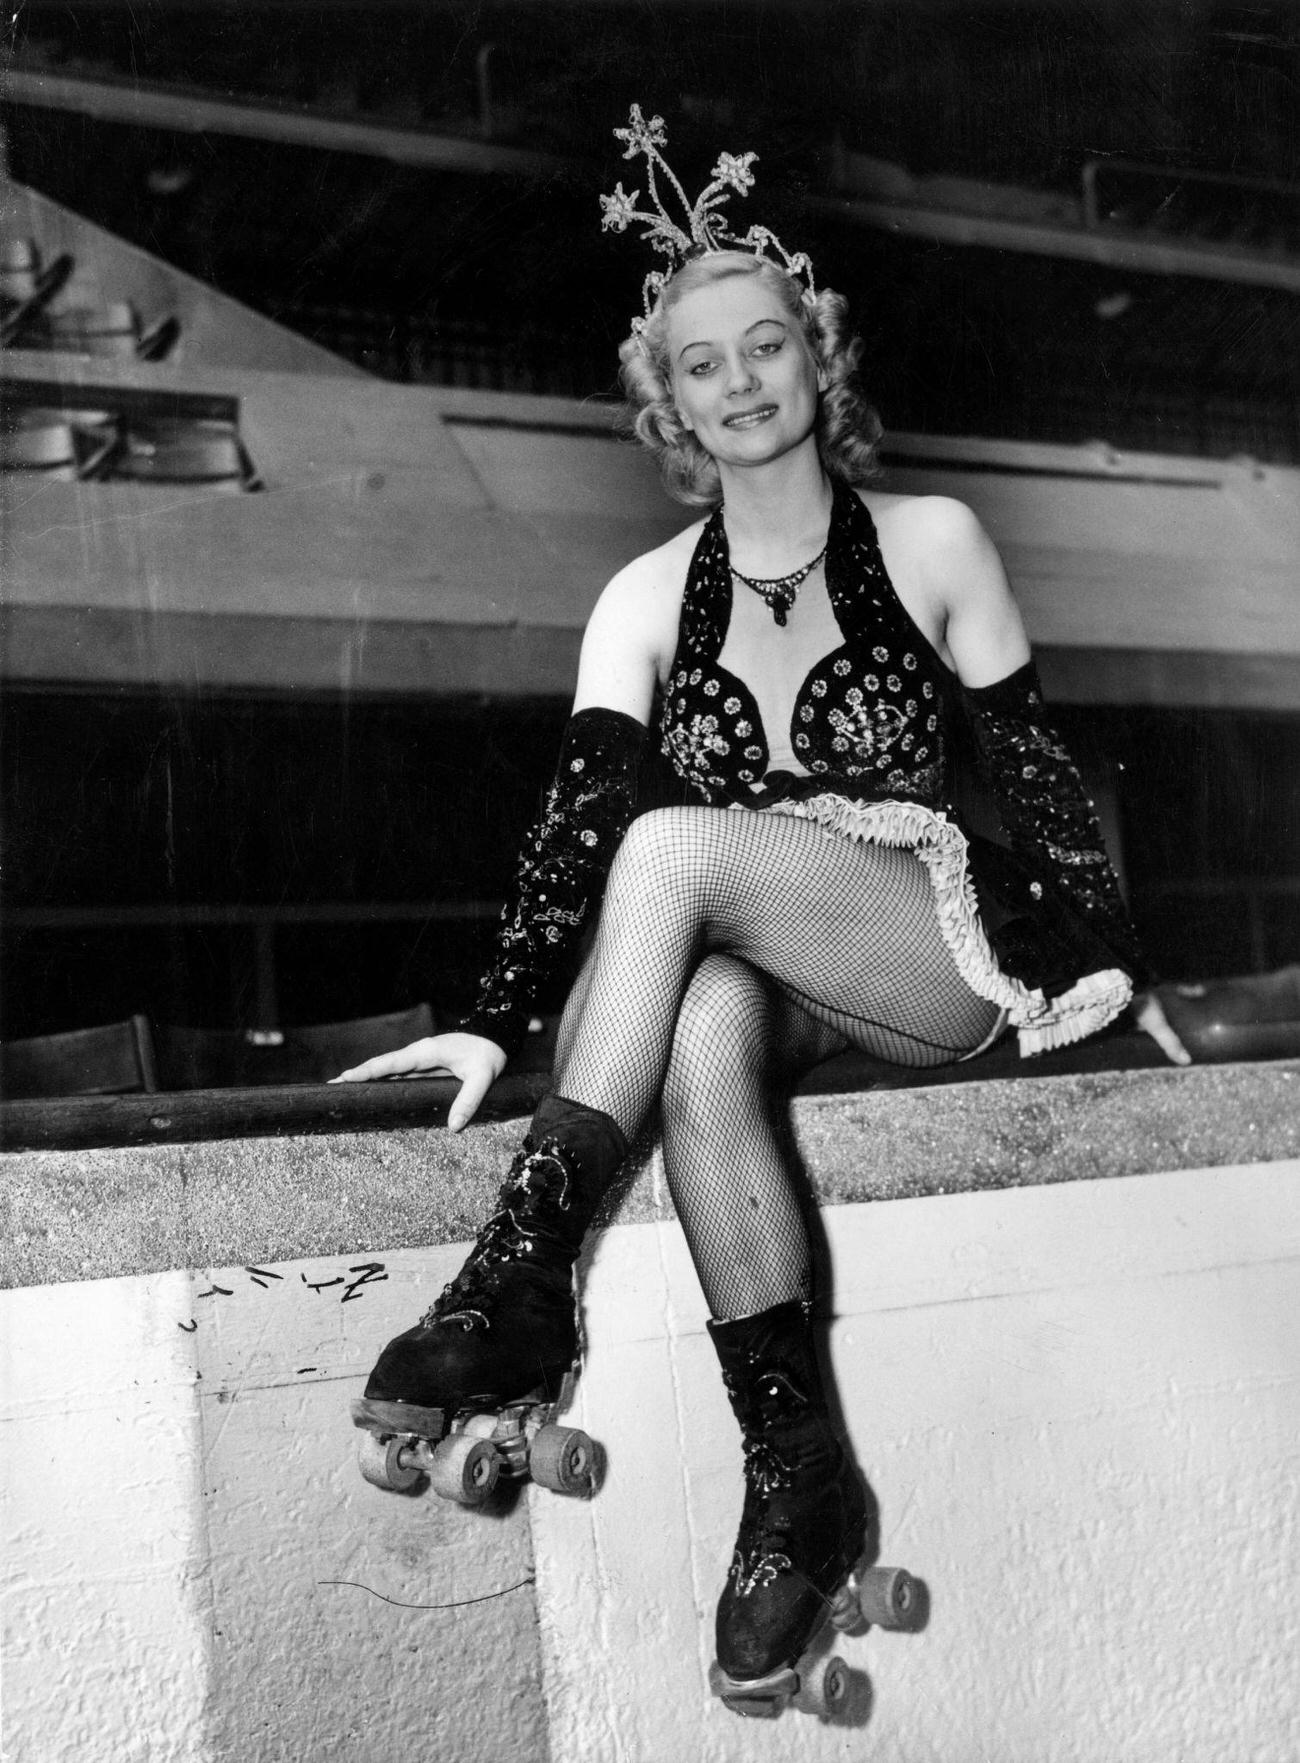 Roller Skater Sitting at the Edge of the Rink, circa 1950.